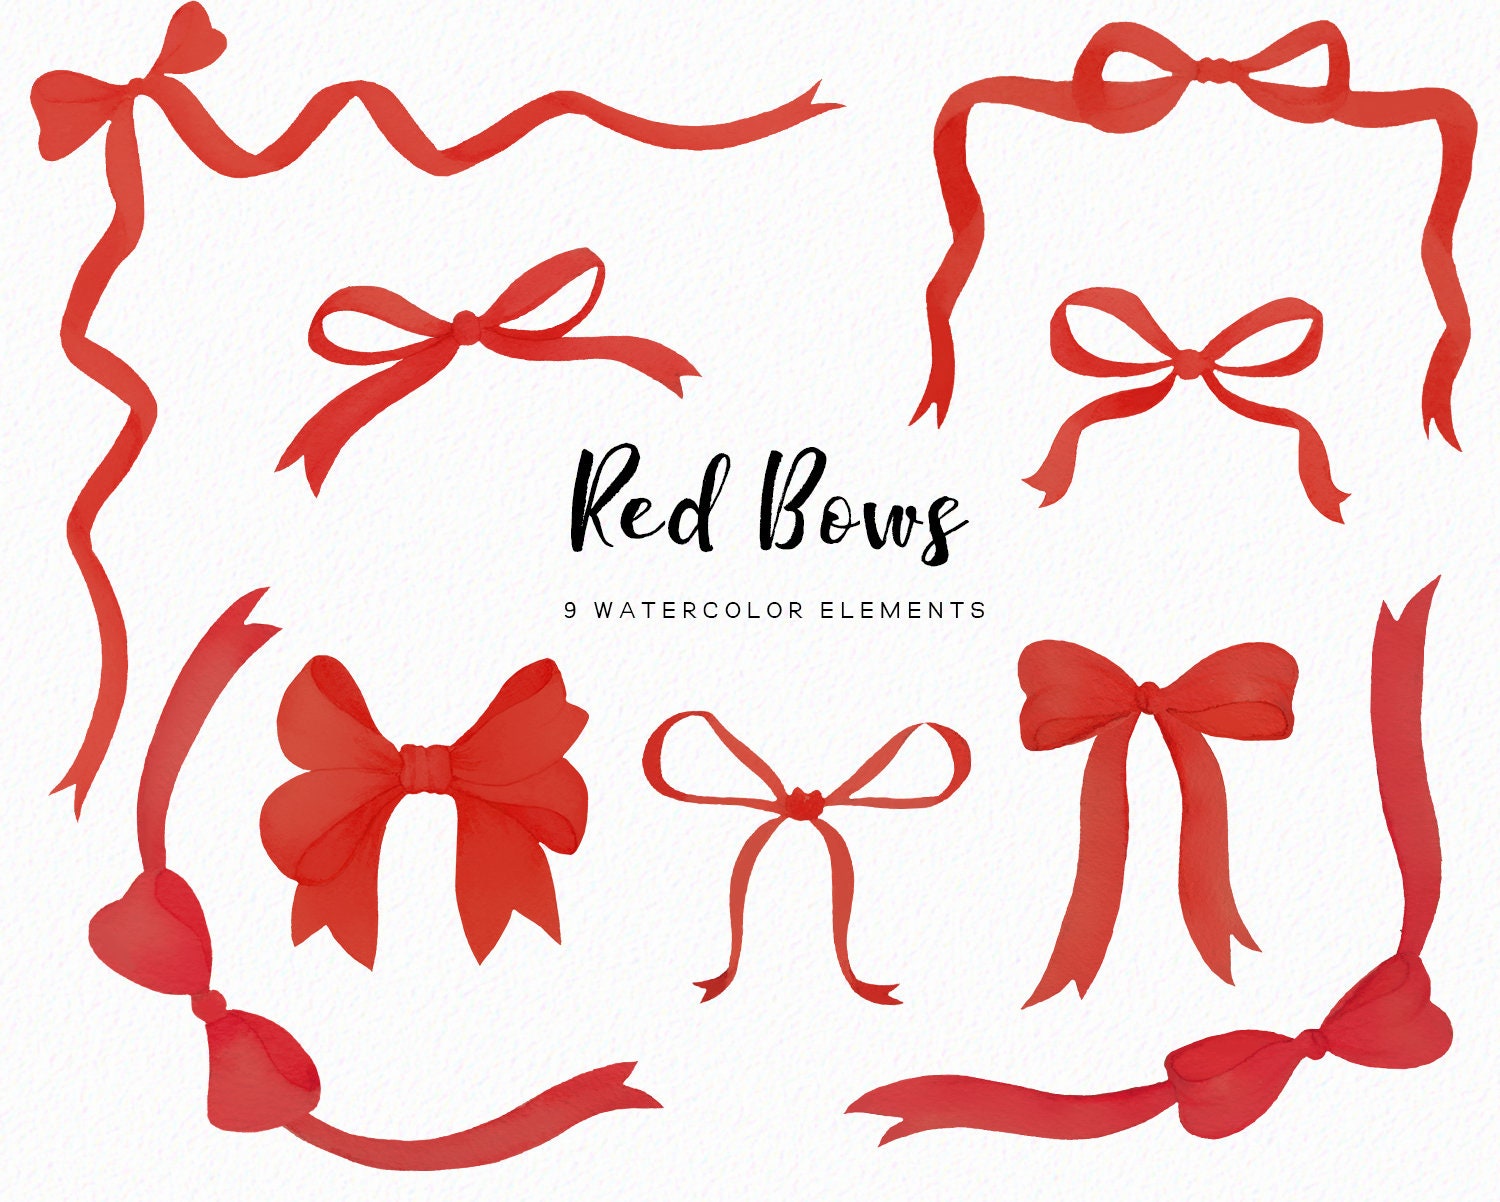 Watercolour Red Bows Clipart Graphic by Jar of Whimsy · Creative Fabrica